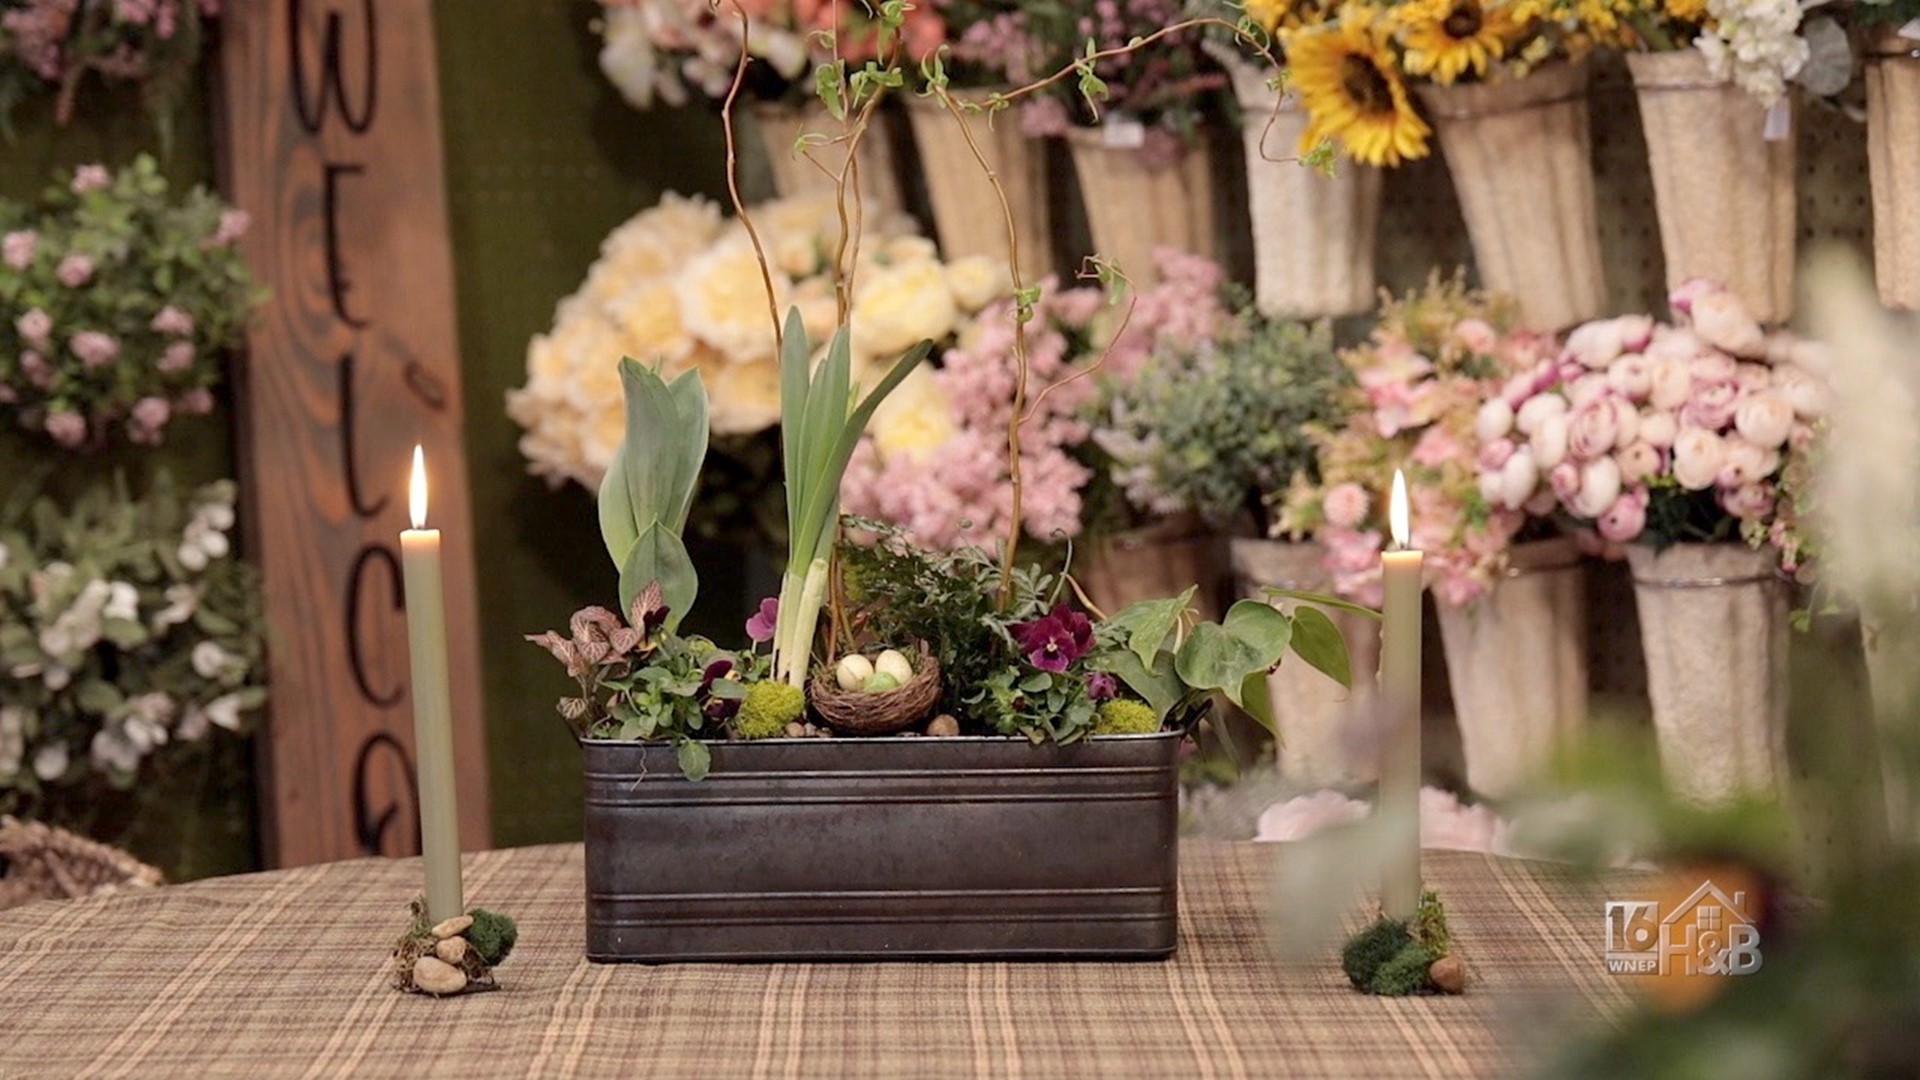 Stunning Indoor Spring Centerpiece Planter "How To" From The Potting Shed